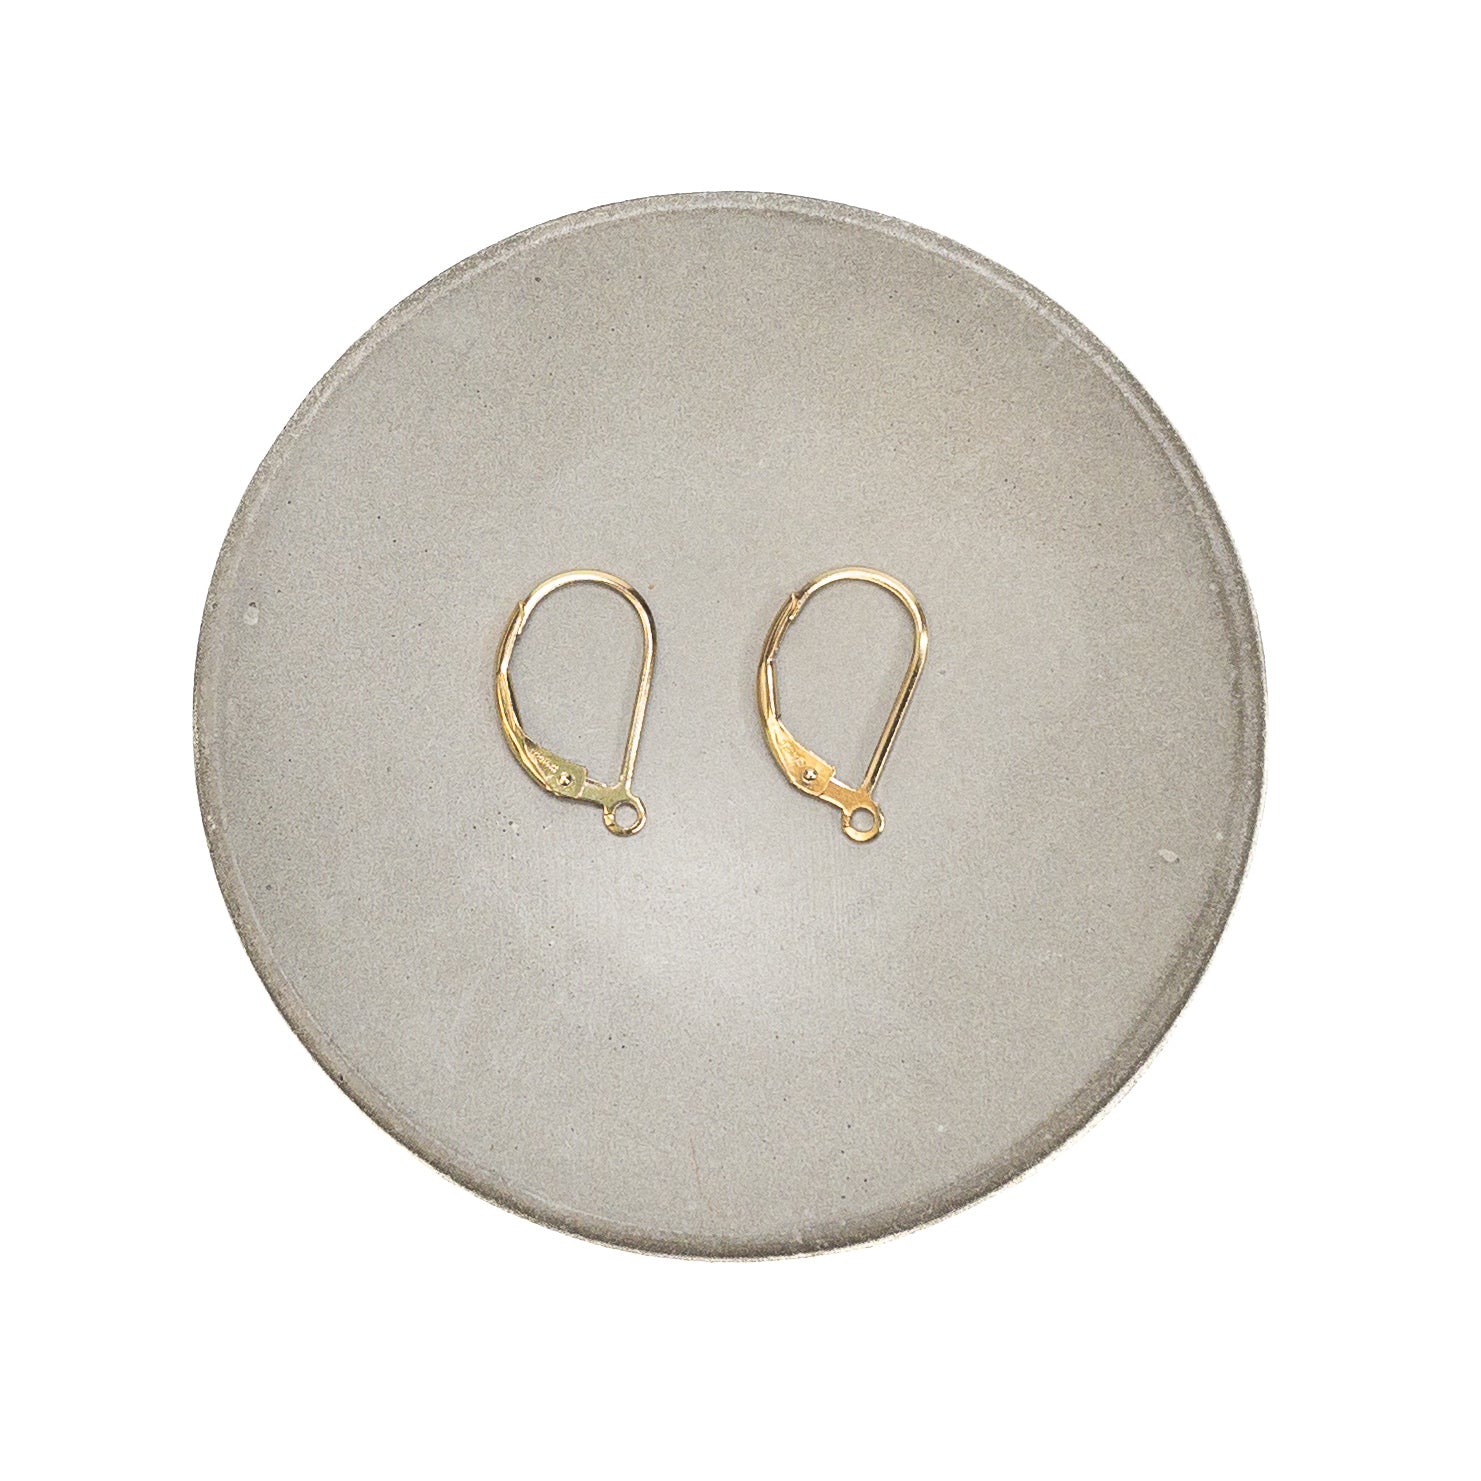 Simple Leverback Earwire (3 Metal Options Available) - 1 pair